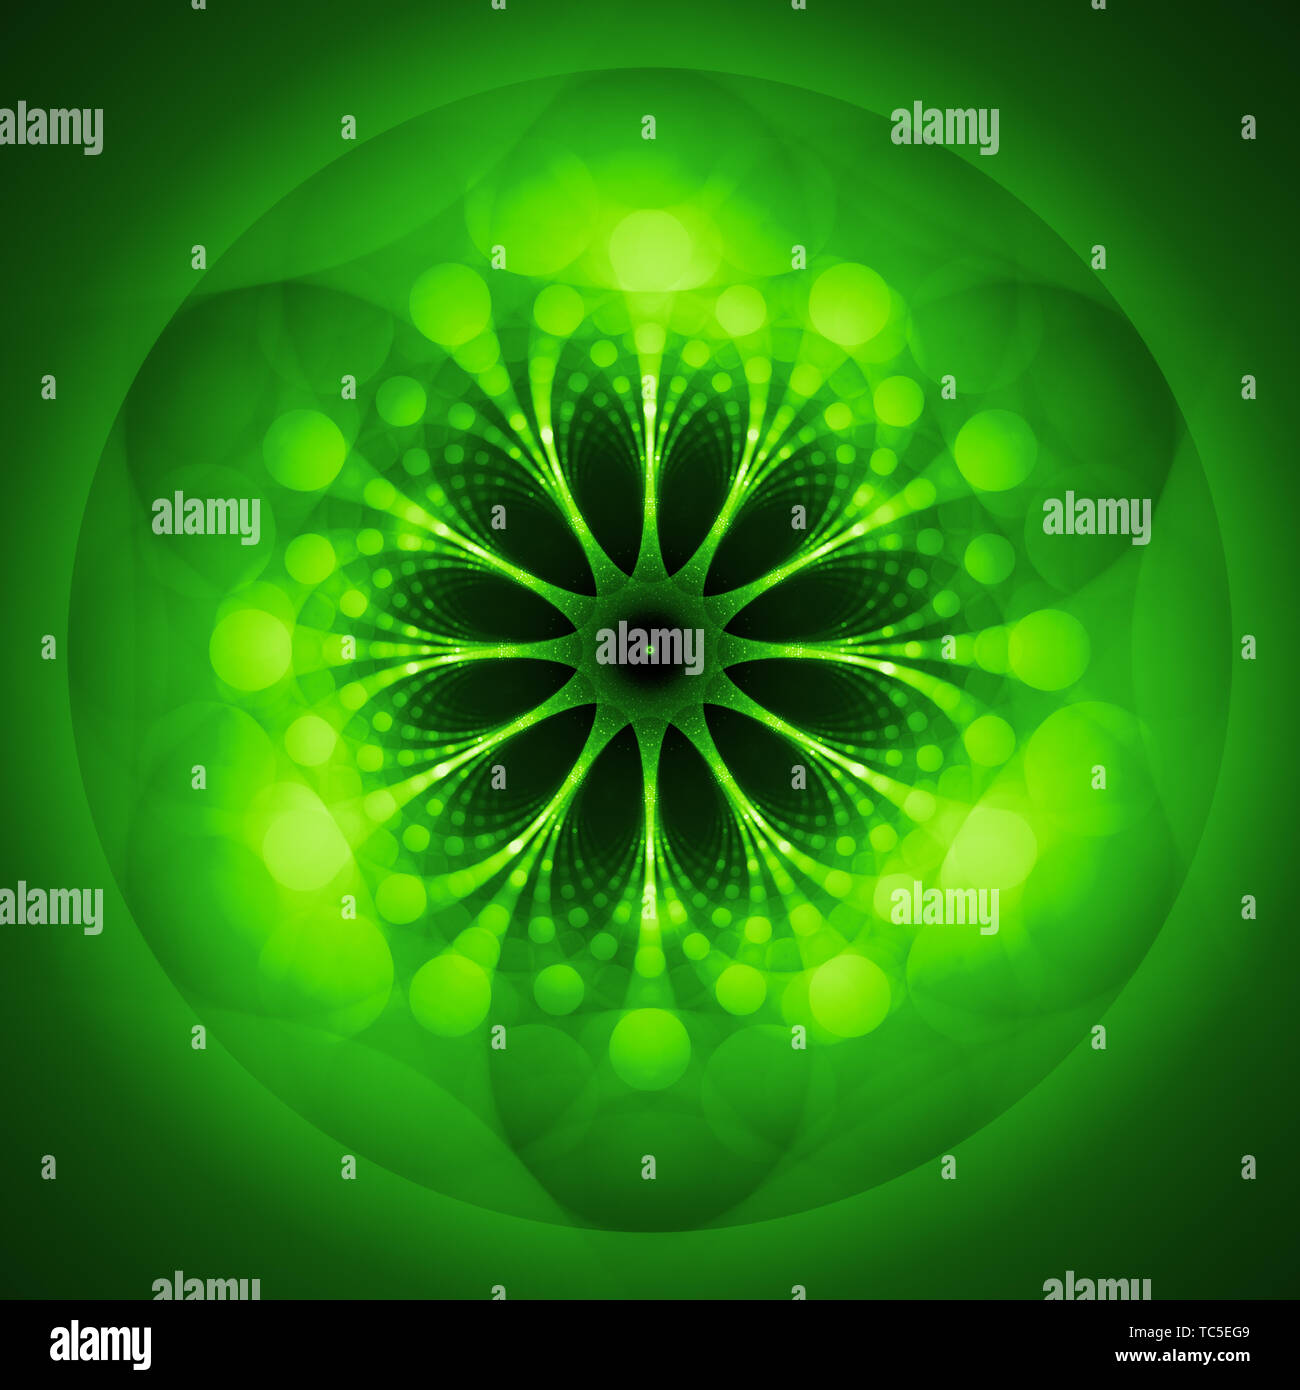 Green glowing network fractal concept, computer generated abstract background, 3D render Stock Photo